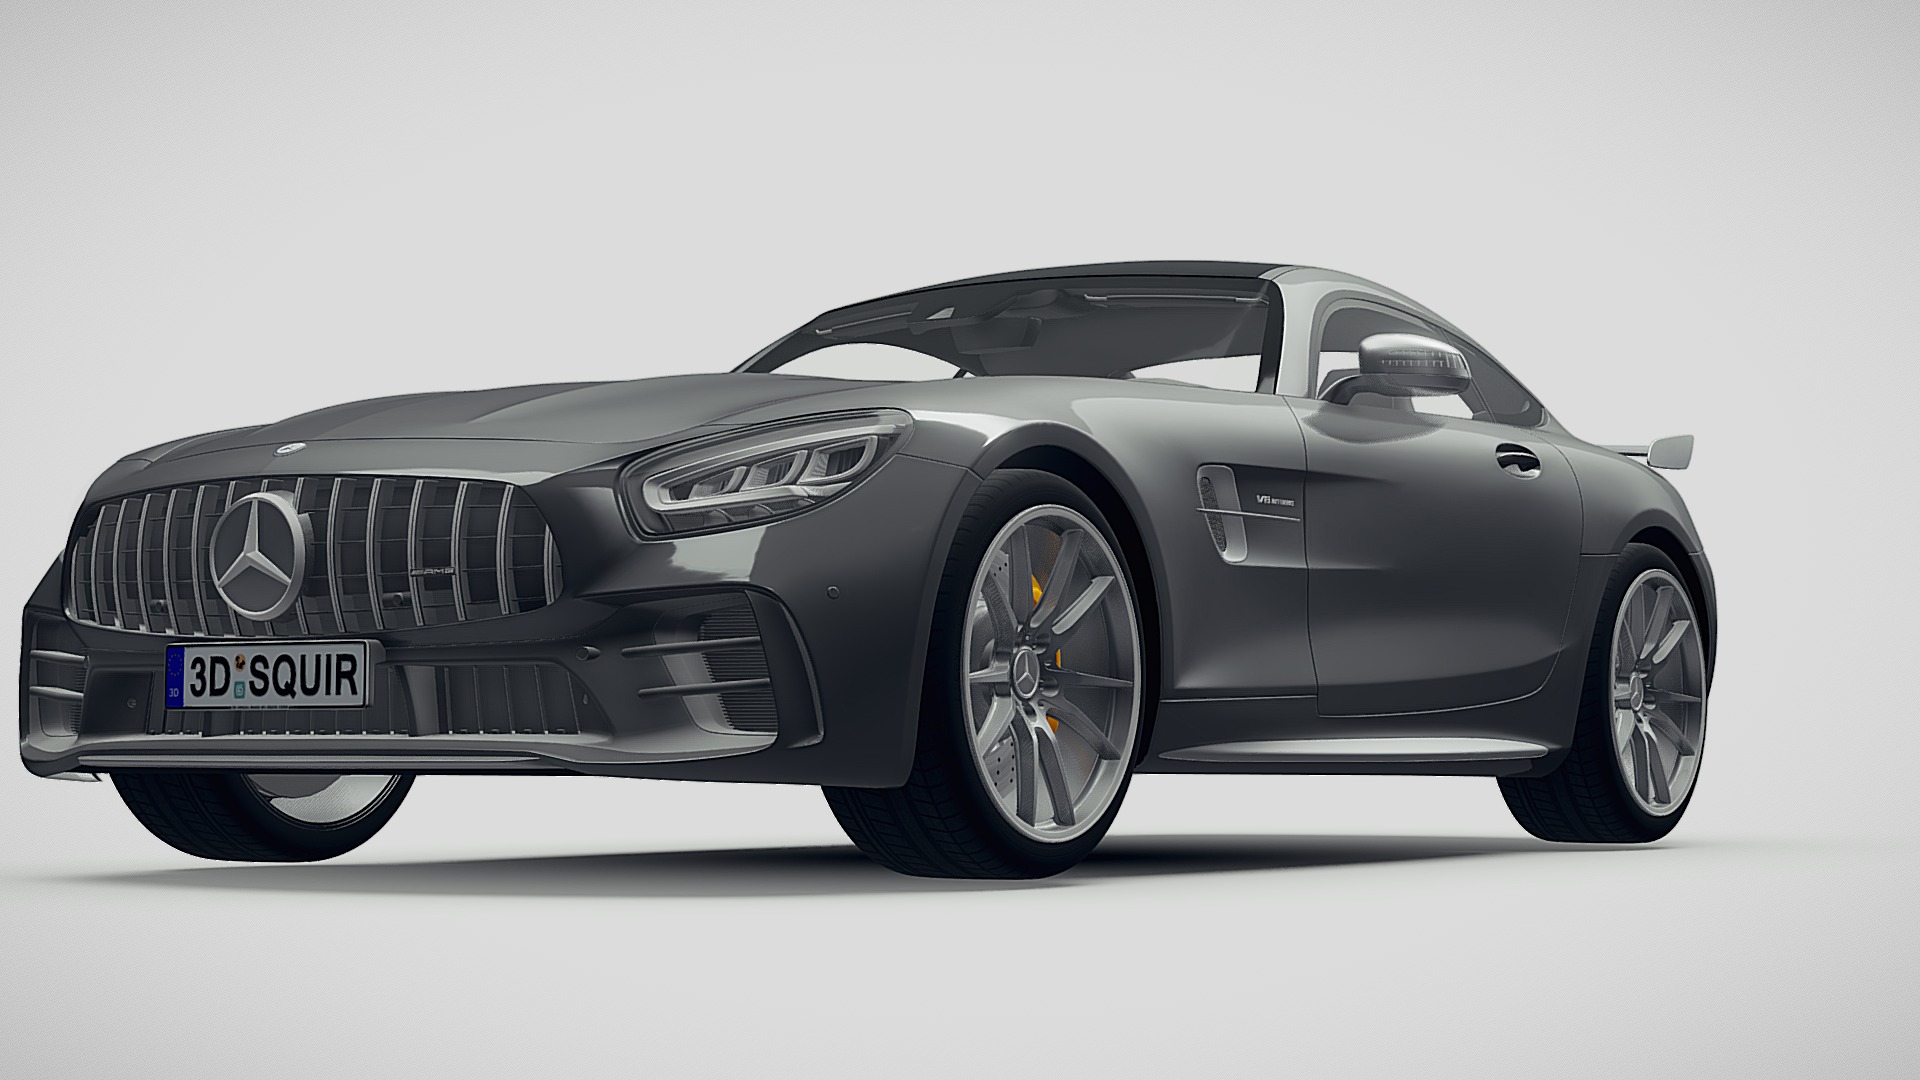 3D model Mercedes AMG GT-R 2020 - This is a 3D model of the Mercedes AMG GT-R 2020. The 3D model is about a black sports car.